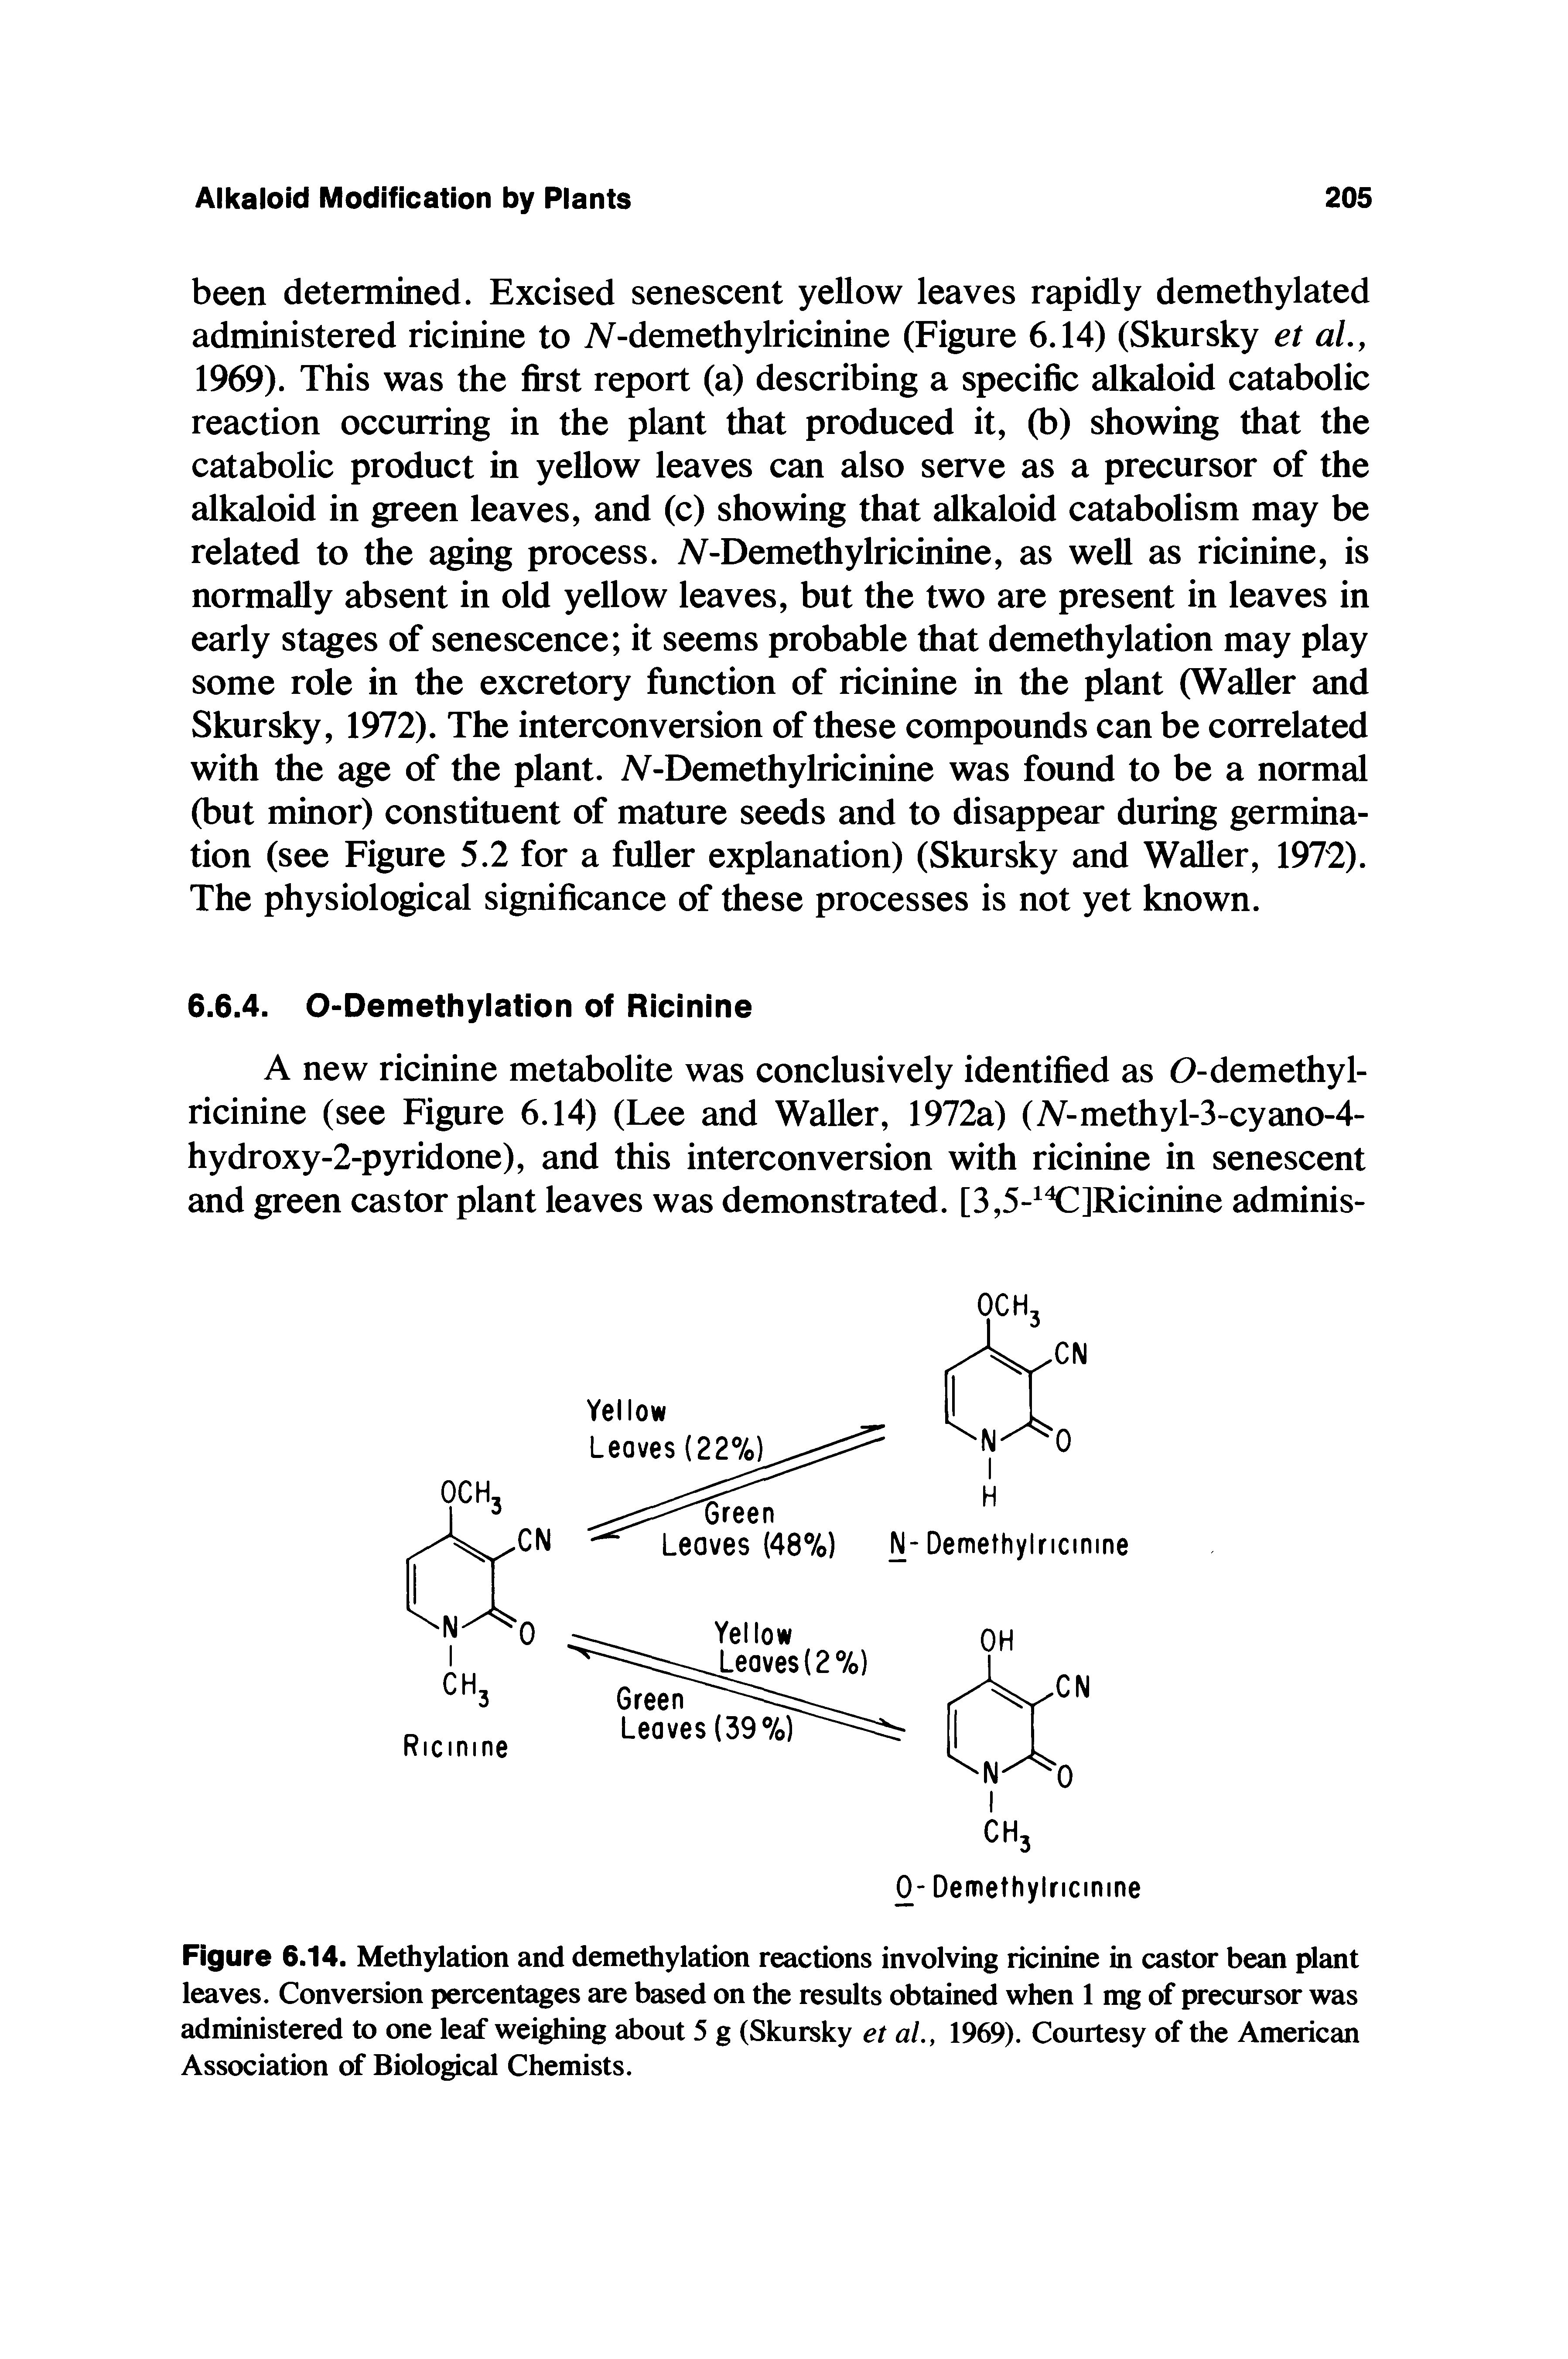 Figure 6.14. Methylation and demethylation reactions involving ricinine in castor bean plant leaves. Conversion percentages are based on the results obtained when 1 mg of precursor was administered to one leaf weighing about 5 g (Skursky et ai, 1969). Courtesy of the American Association of Biological Chemists.